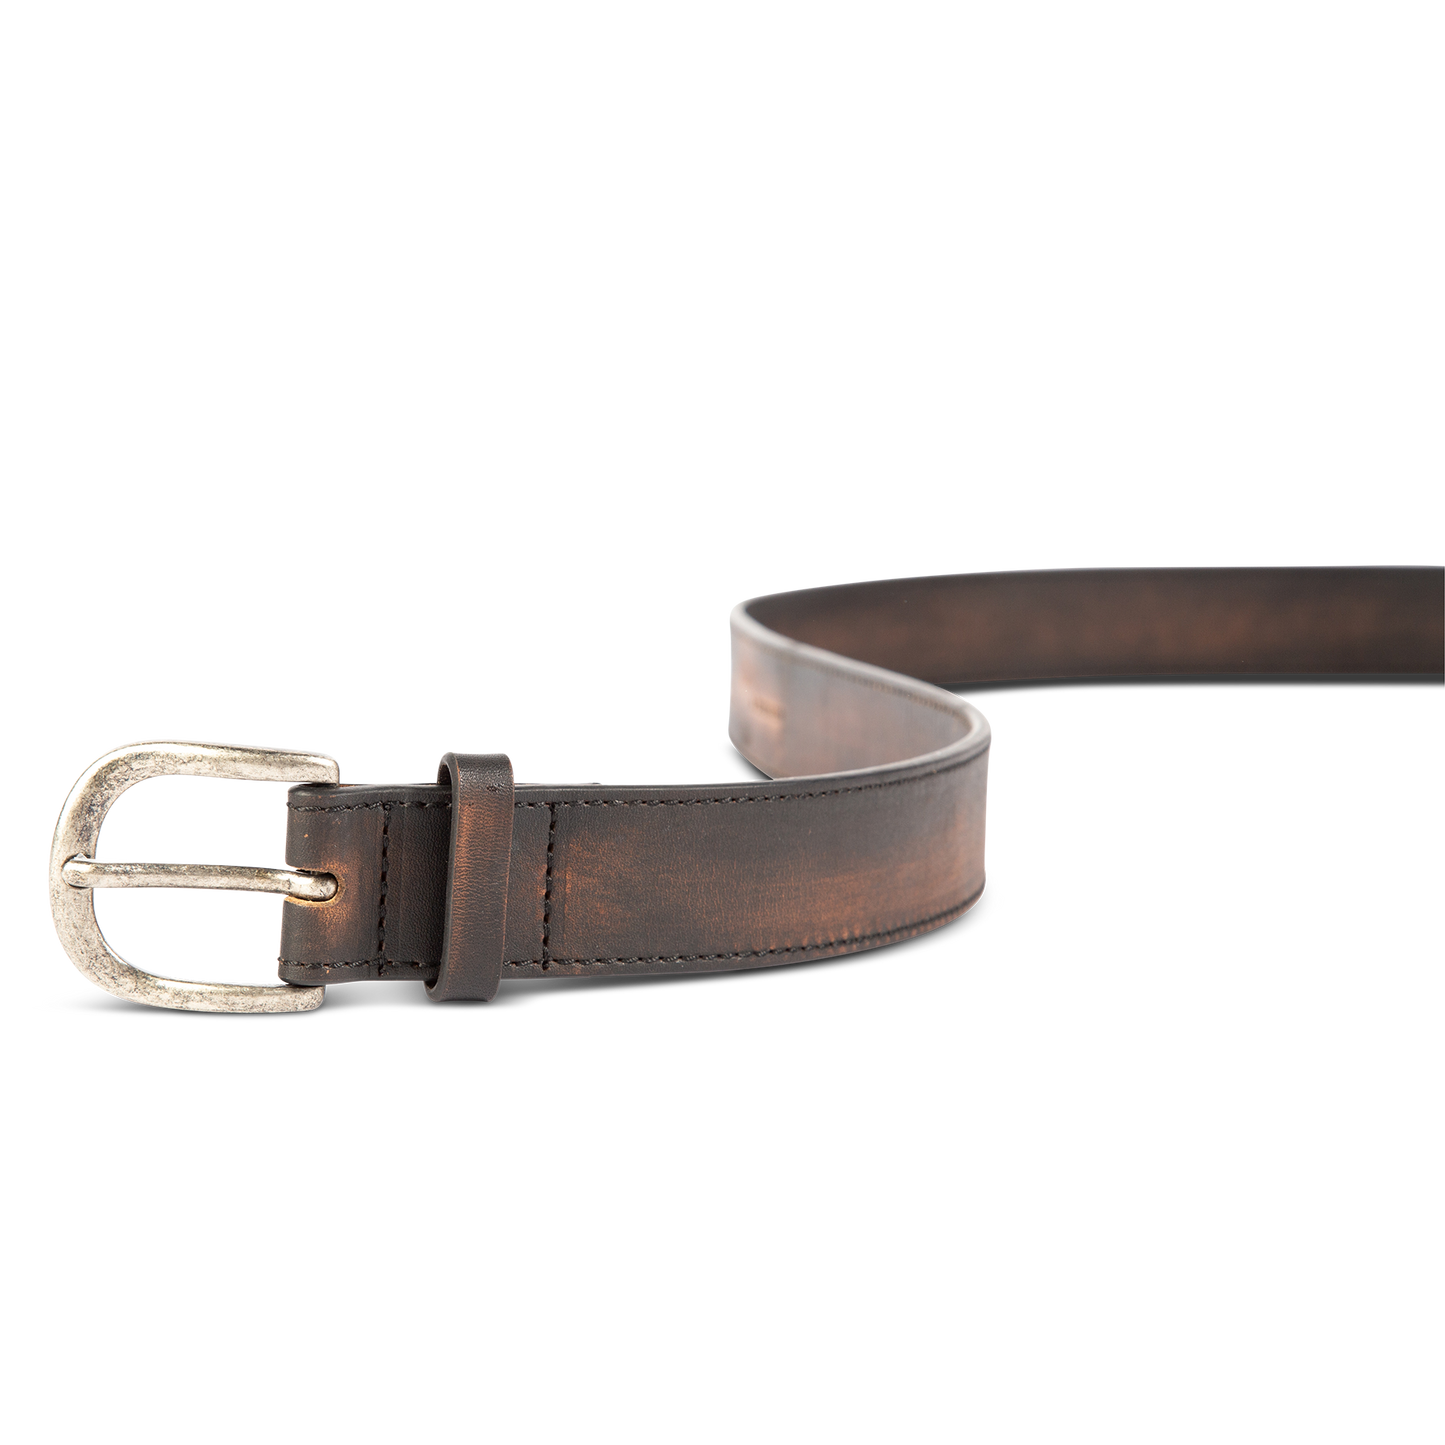 Classic black distressed front view featuring silver buckle hardware on FREEBIRD full grain leather belt